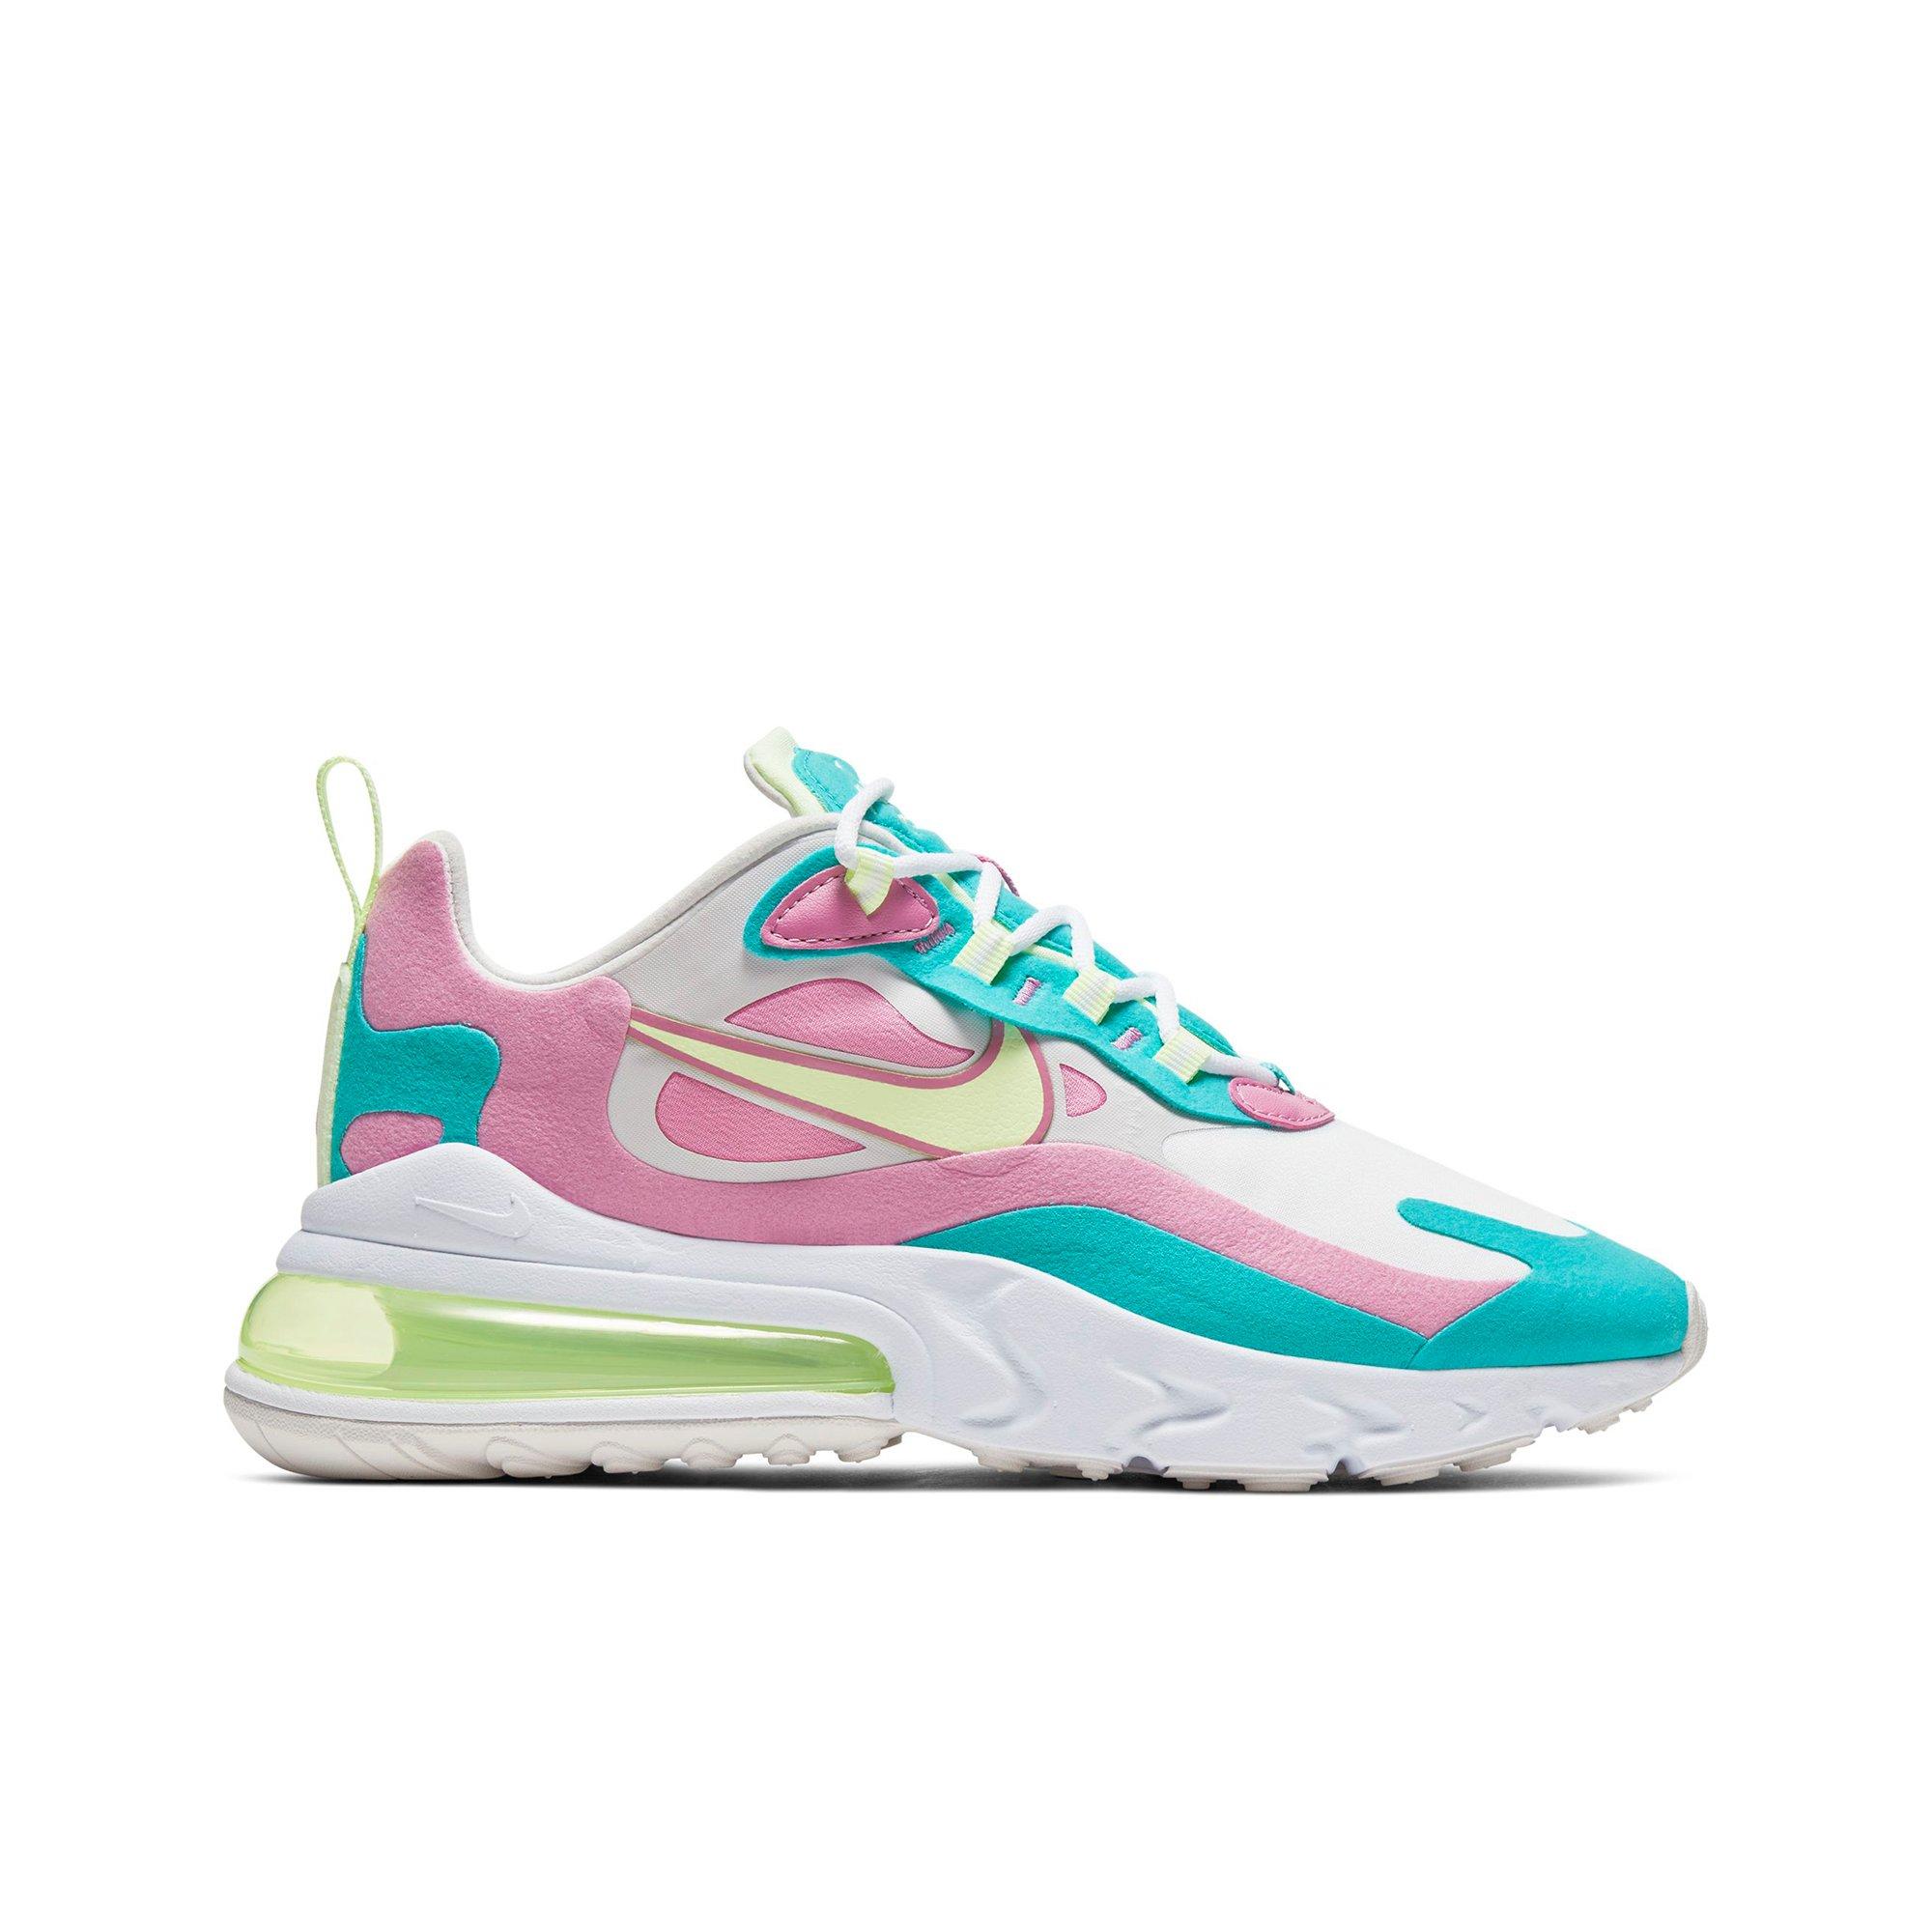 nike air max 270 turquoise and pink